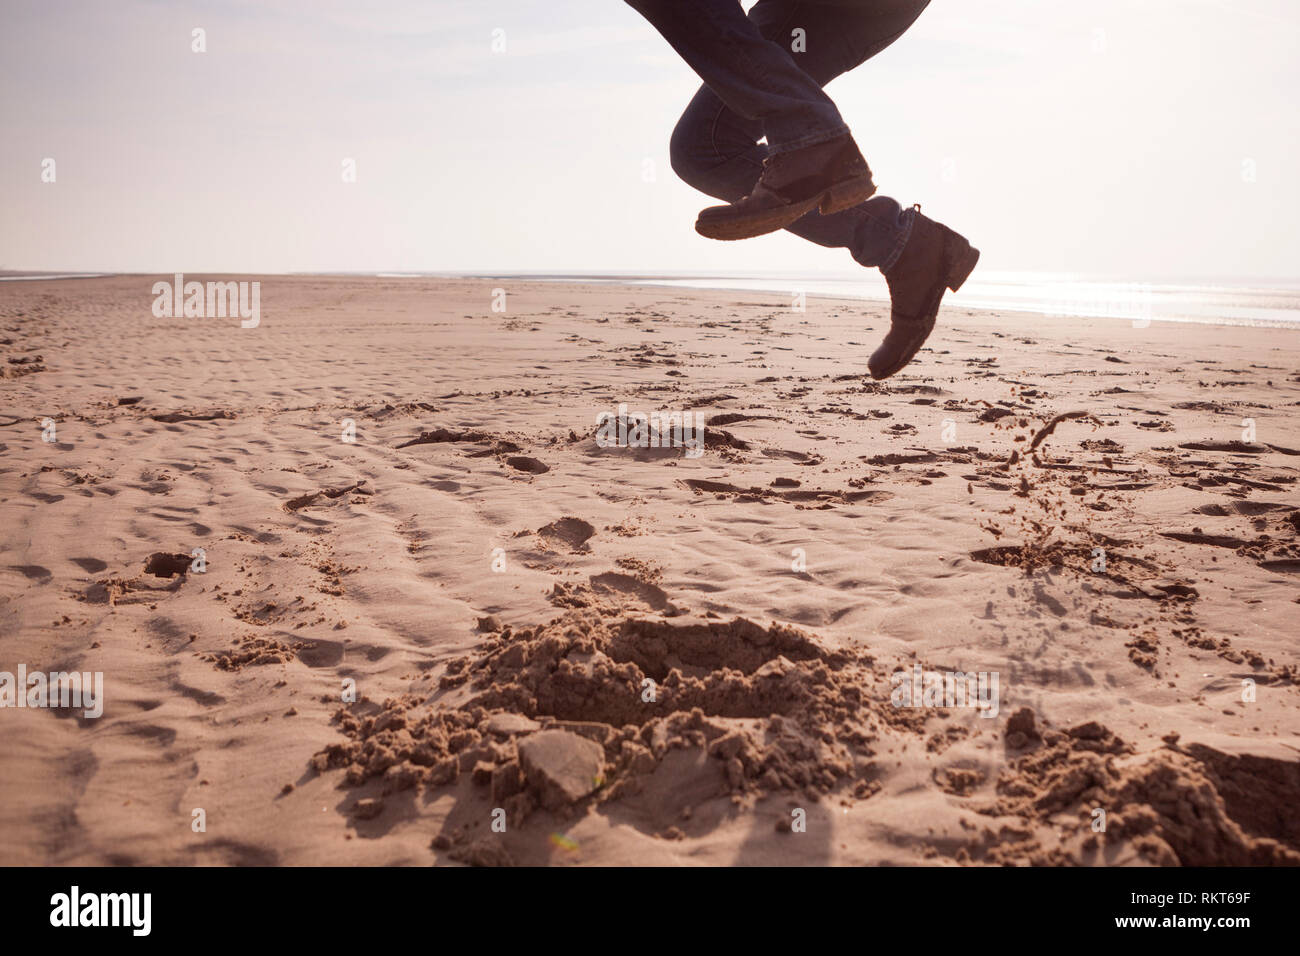 Man wearing jeans and heeled boots, jumping up on a sandy UK beach on a cold spring day Stock Photo